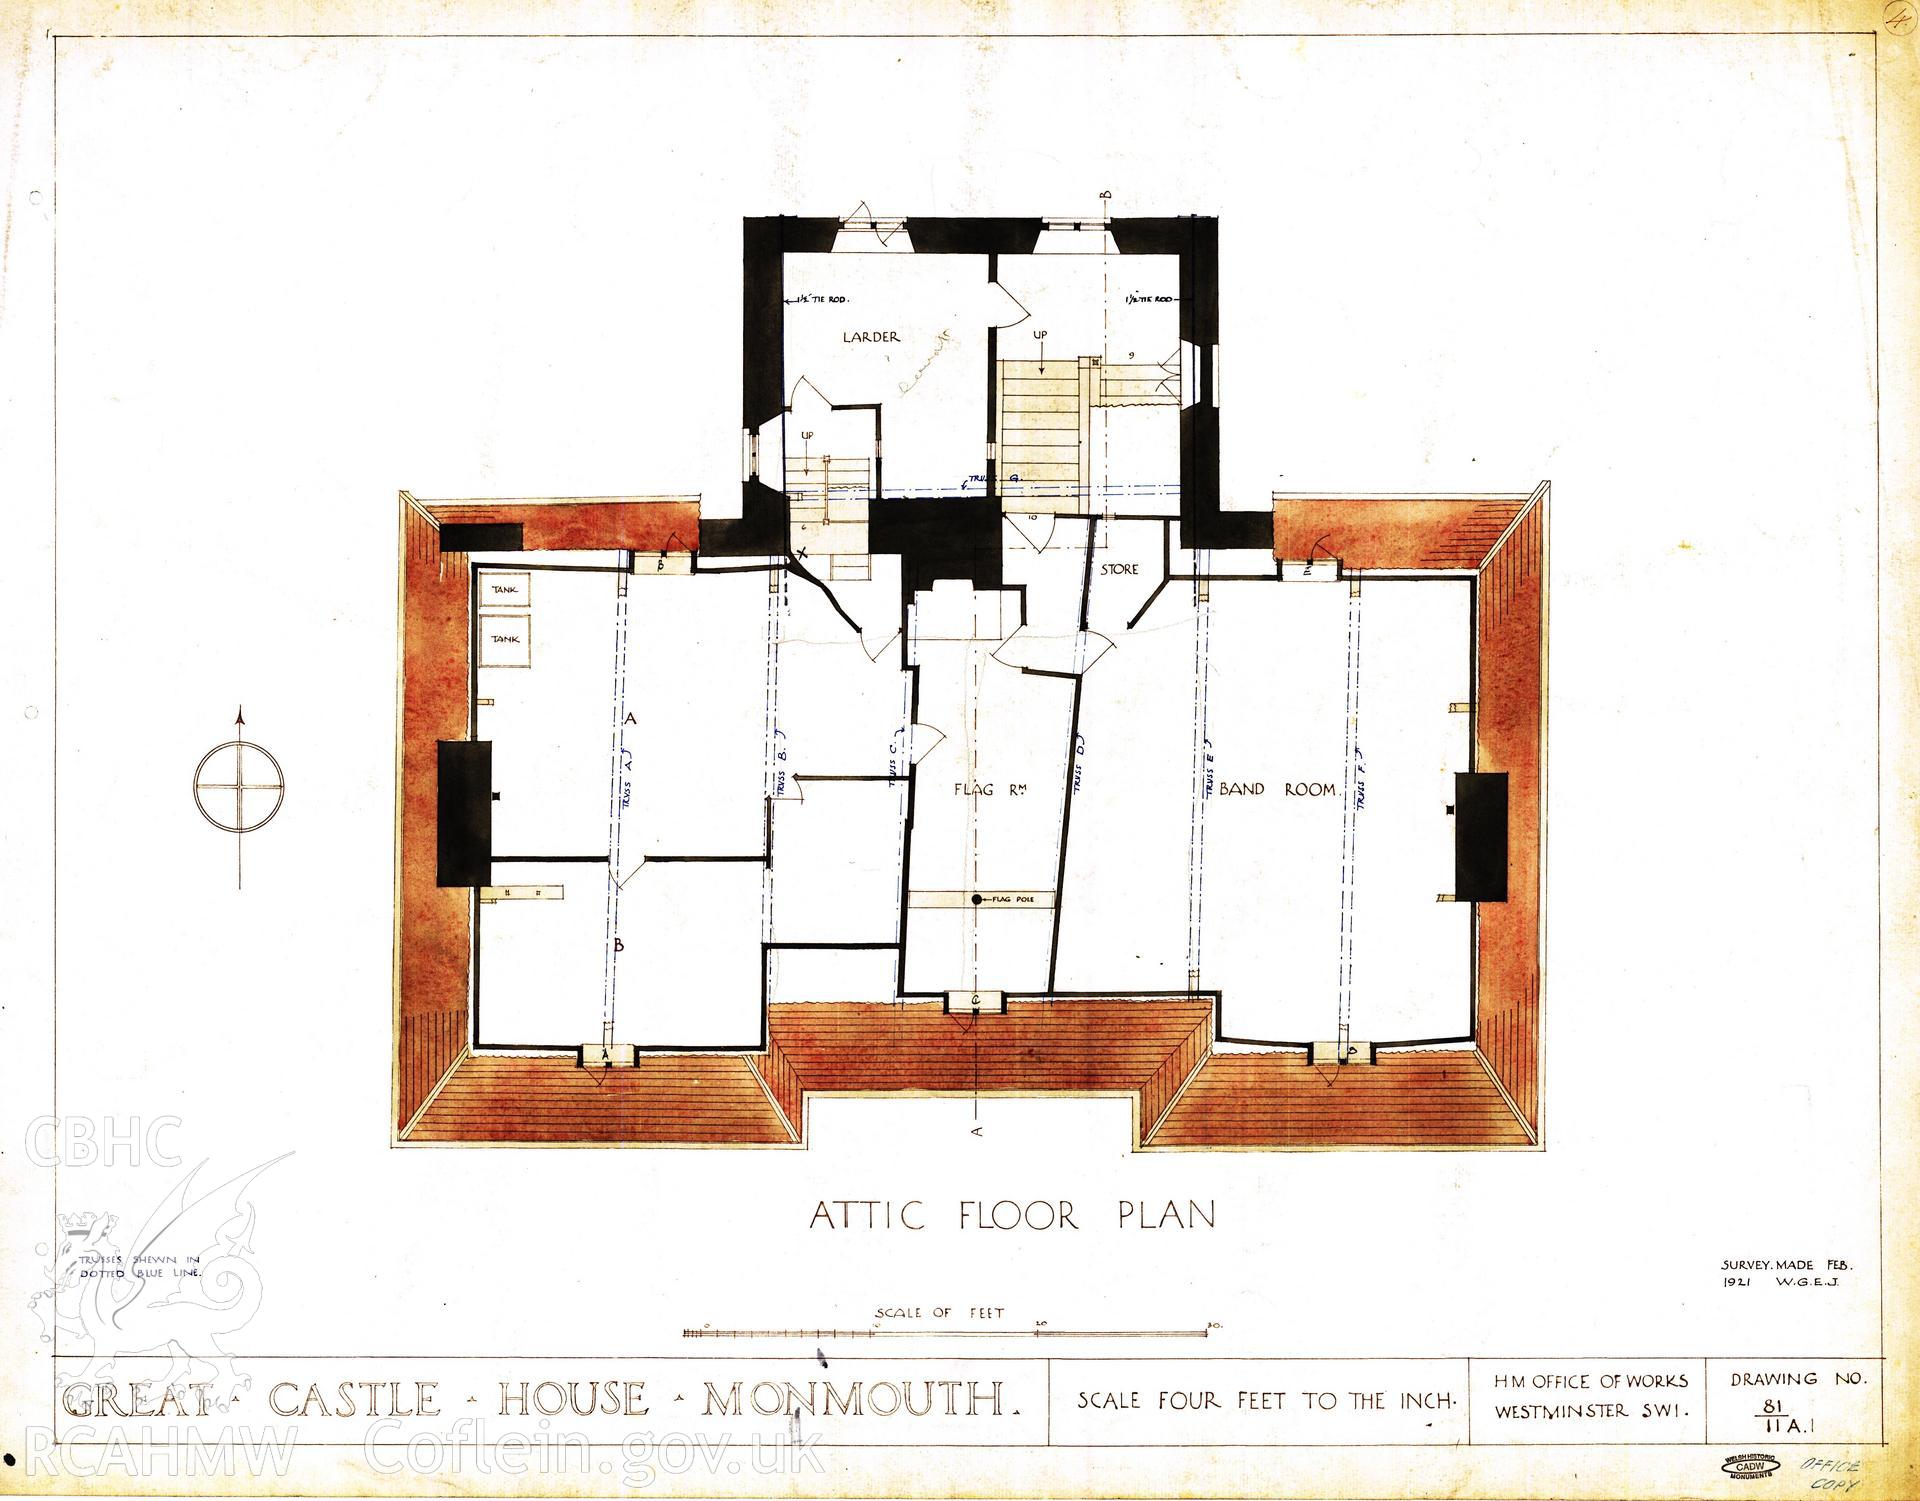 Cadw guardianship monument drawing of Monmouth Great Castle House. Attic Floor Plan. Cadw Ref. No:81/11A1. Scale 1:48.